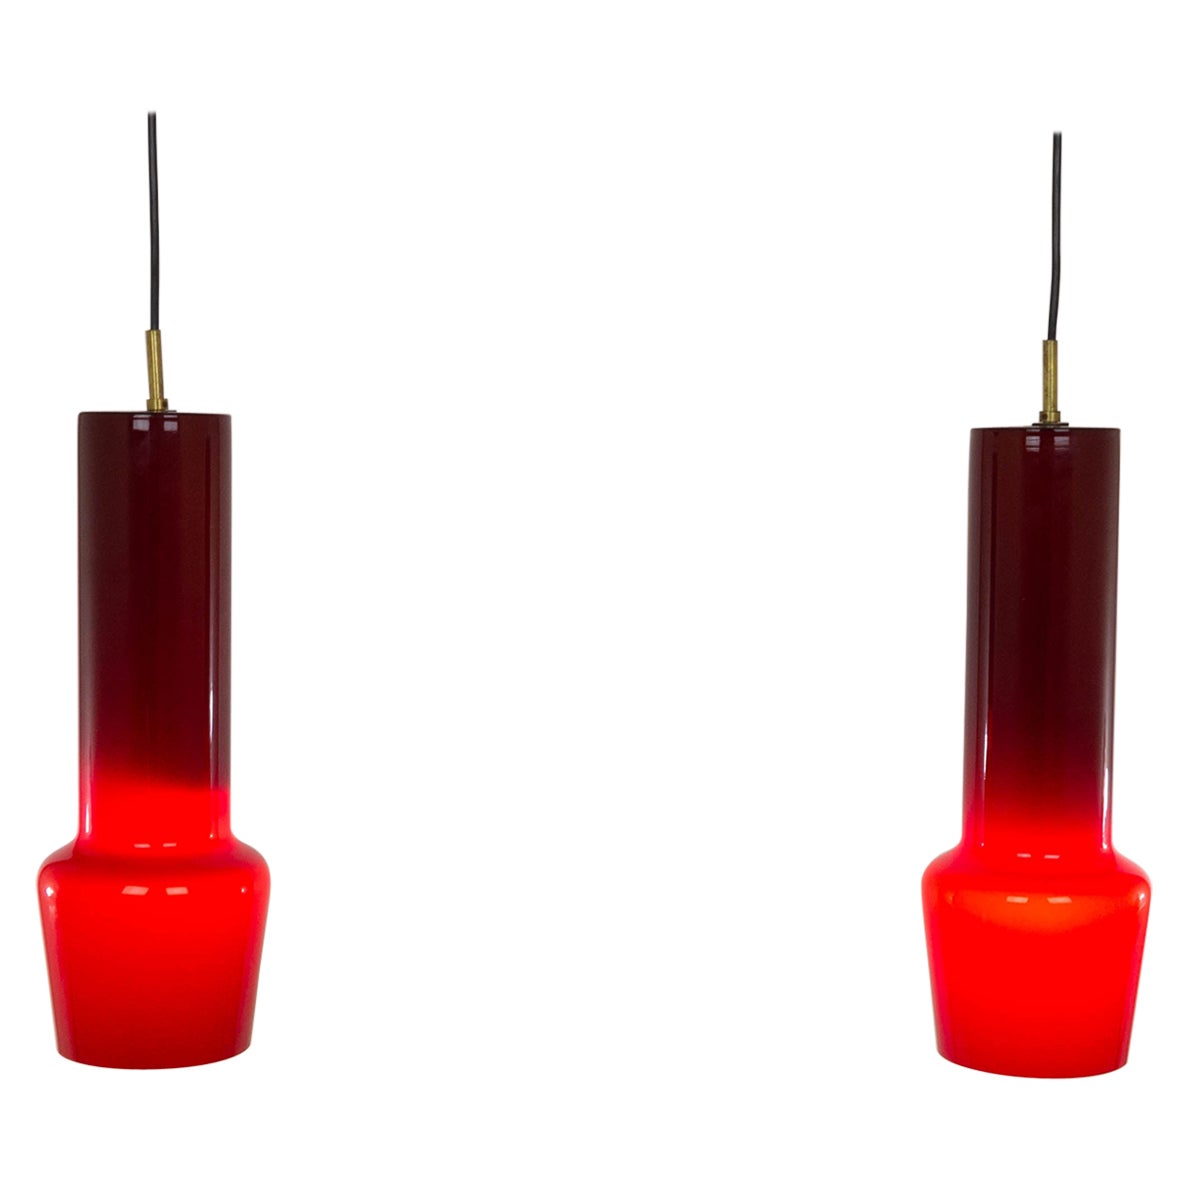 Pair of red glass pendants by Massimo Vignelli for Venini, 1950s For Sale